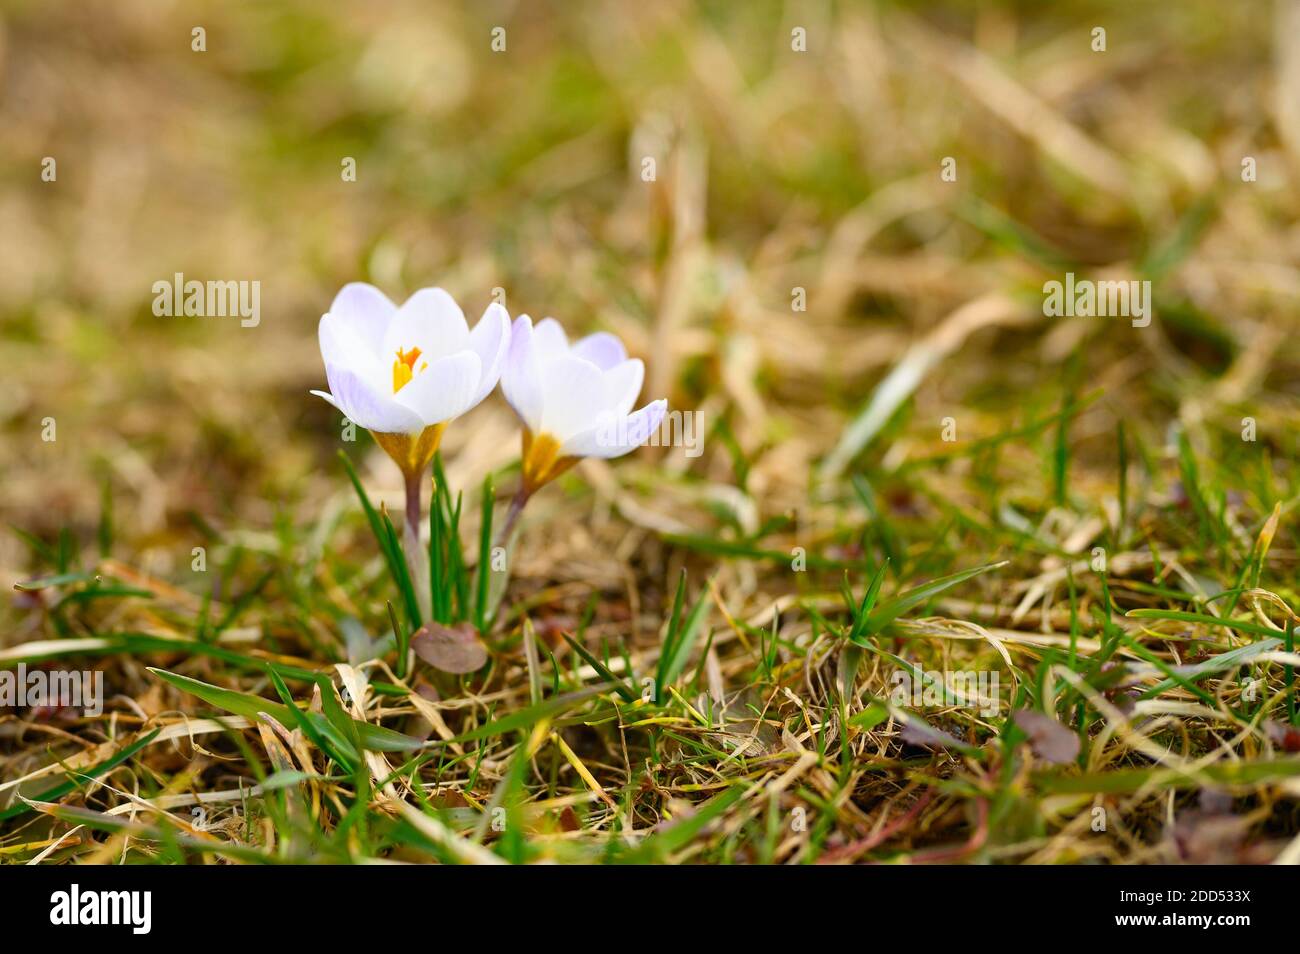 flowers crocuses in full blossom, white lilac color, grow on the withered grass. the first spring flowers in nature outdoor Stock Photo